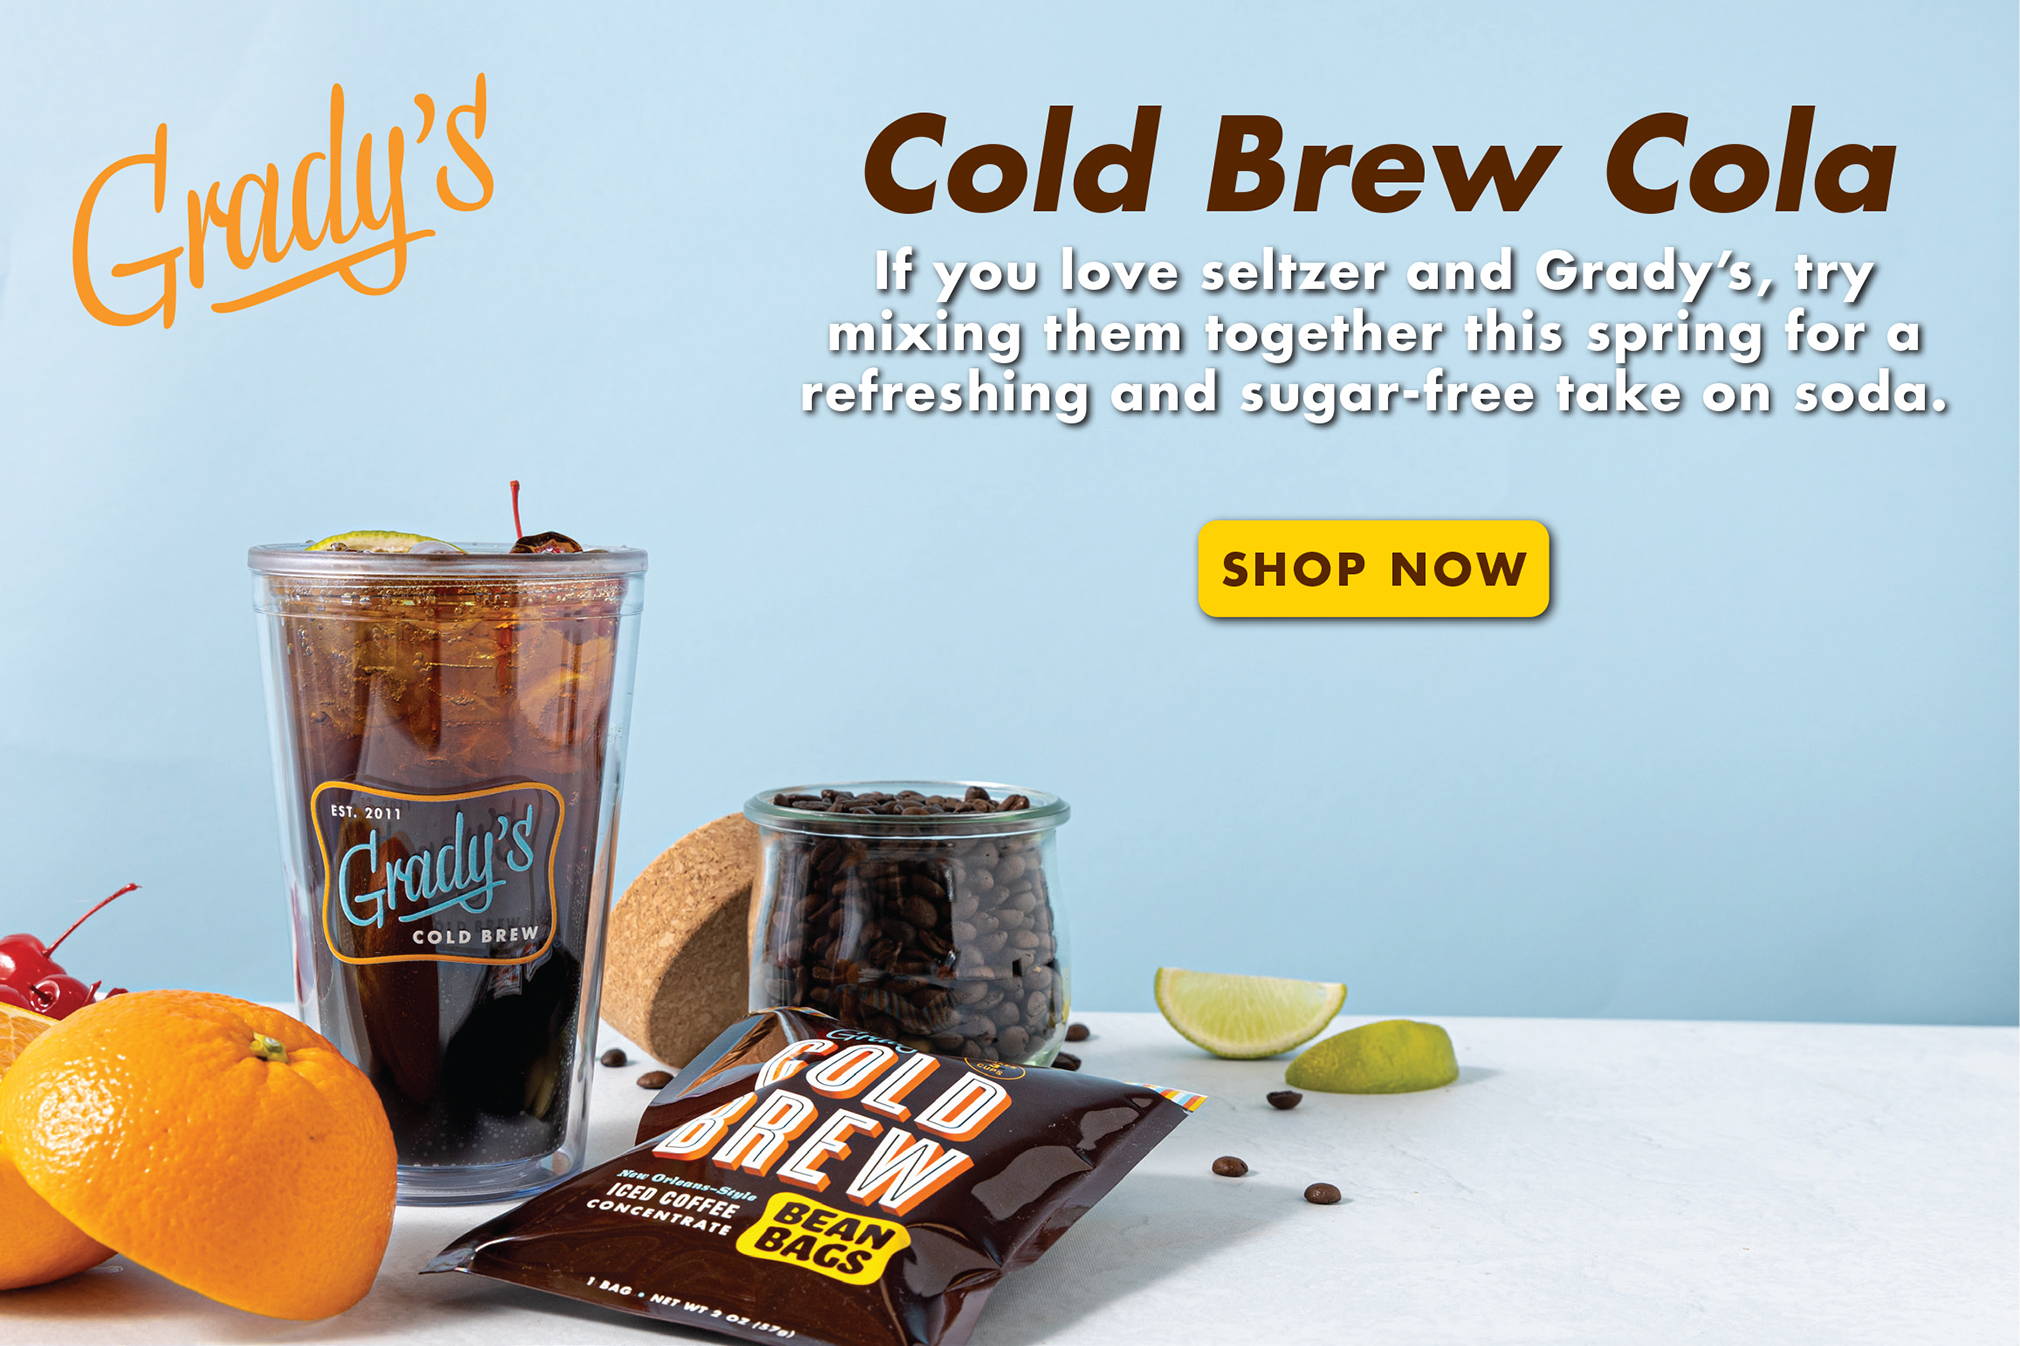 Cold Brew Cola - If you love seltzer and Grady's, try mixing them together this spring for a refreshing and sugar-free take on soda. SHOP NOW.